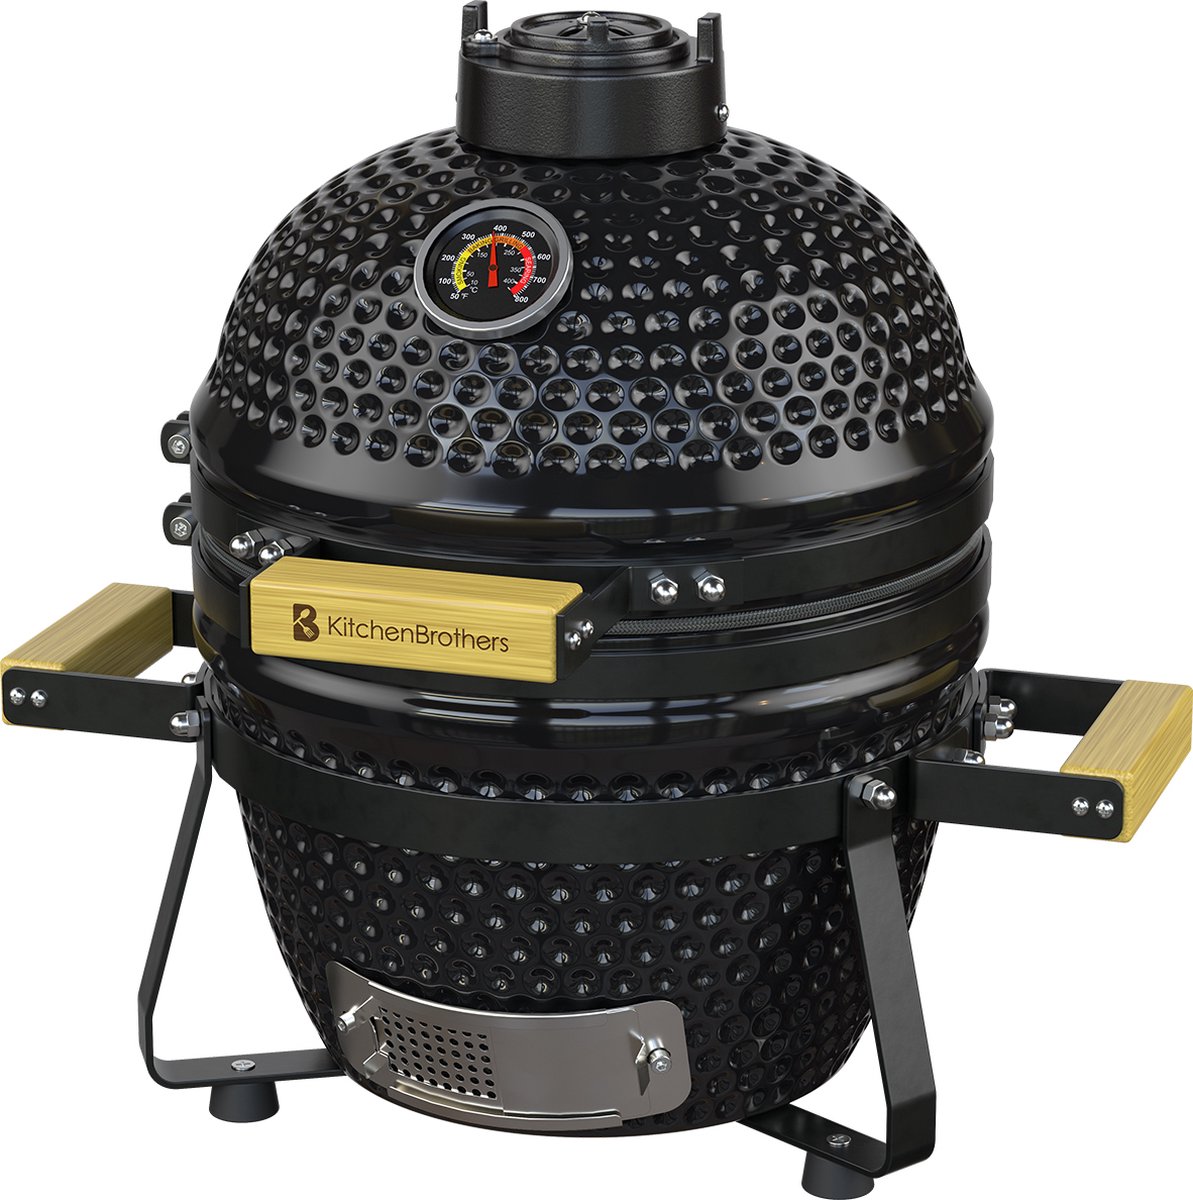 KitchenBrothers Kamado BBQ - 13 Inch Houtskoolbarbecue - 27⌀ cm - Deluxe Set - Egg BBQ met Accessoires - Zwart - KitchenBrothers